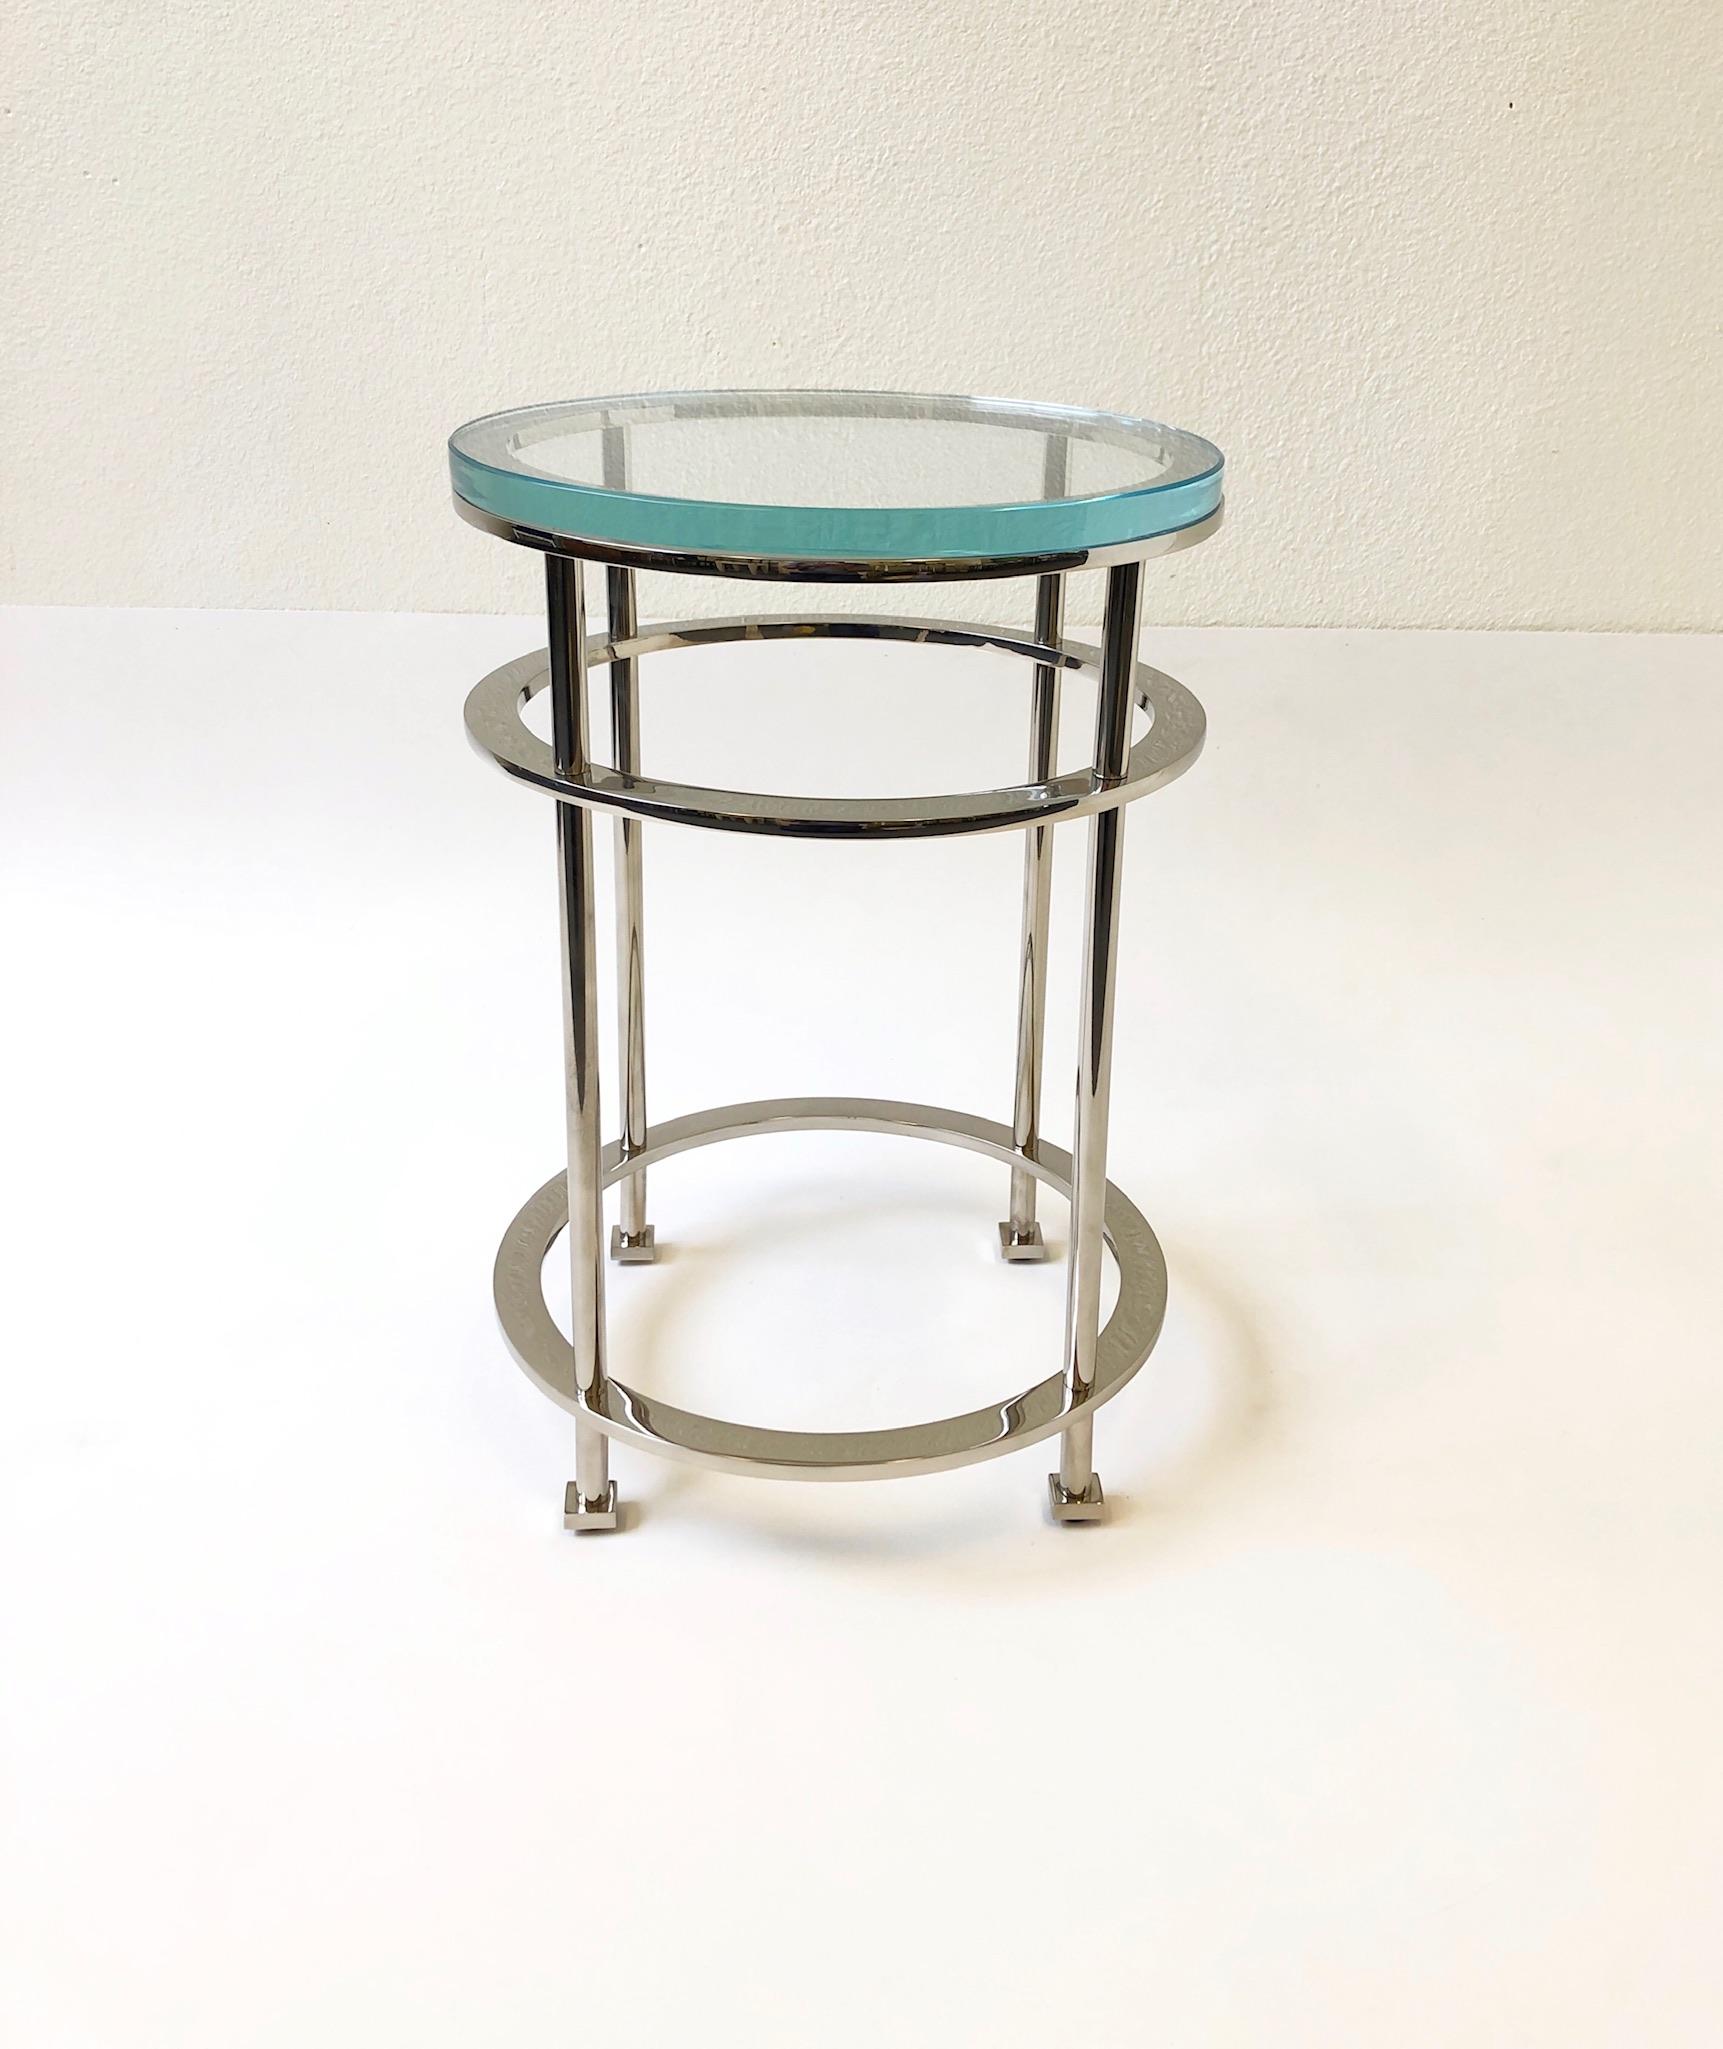 American Pair of Nickel and Lucite Side Tables by Jean Michel Wilmotte for Mirak